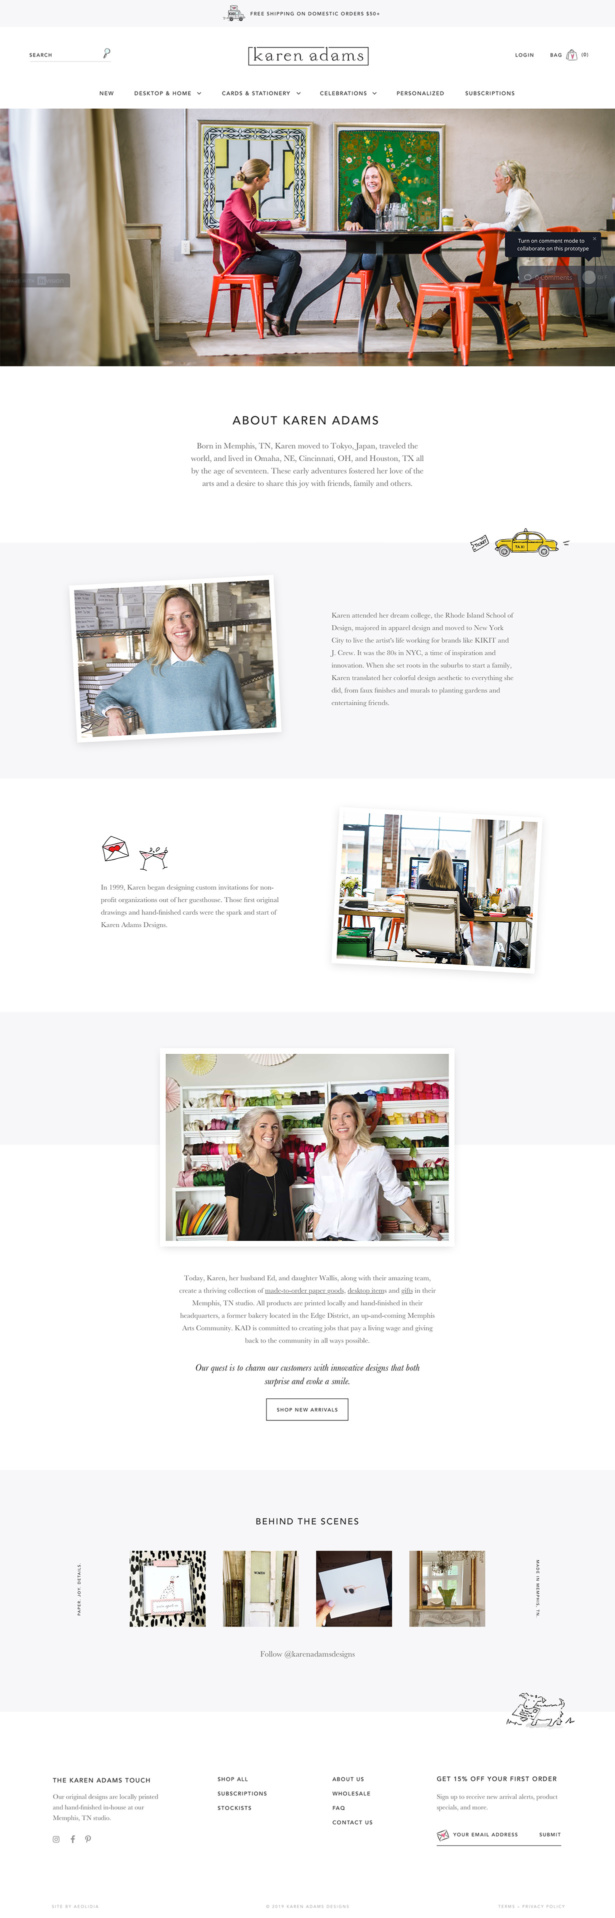 Karen Adams Designs custom Shopify about page for stationery line